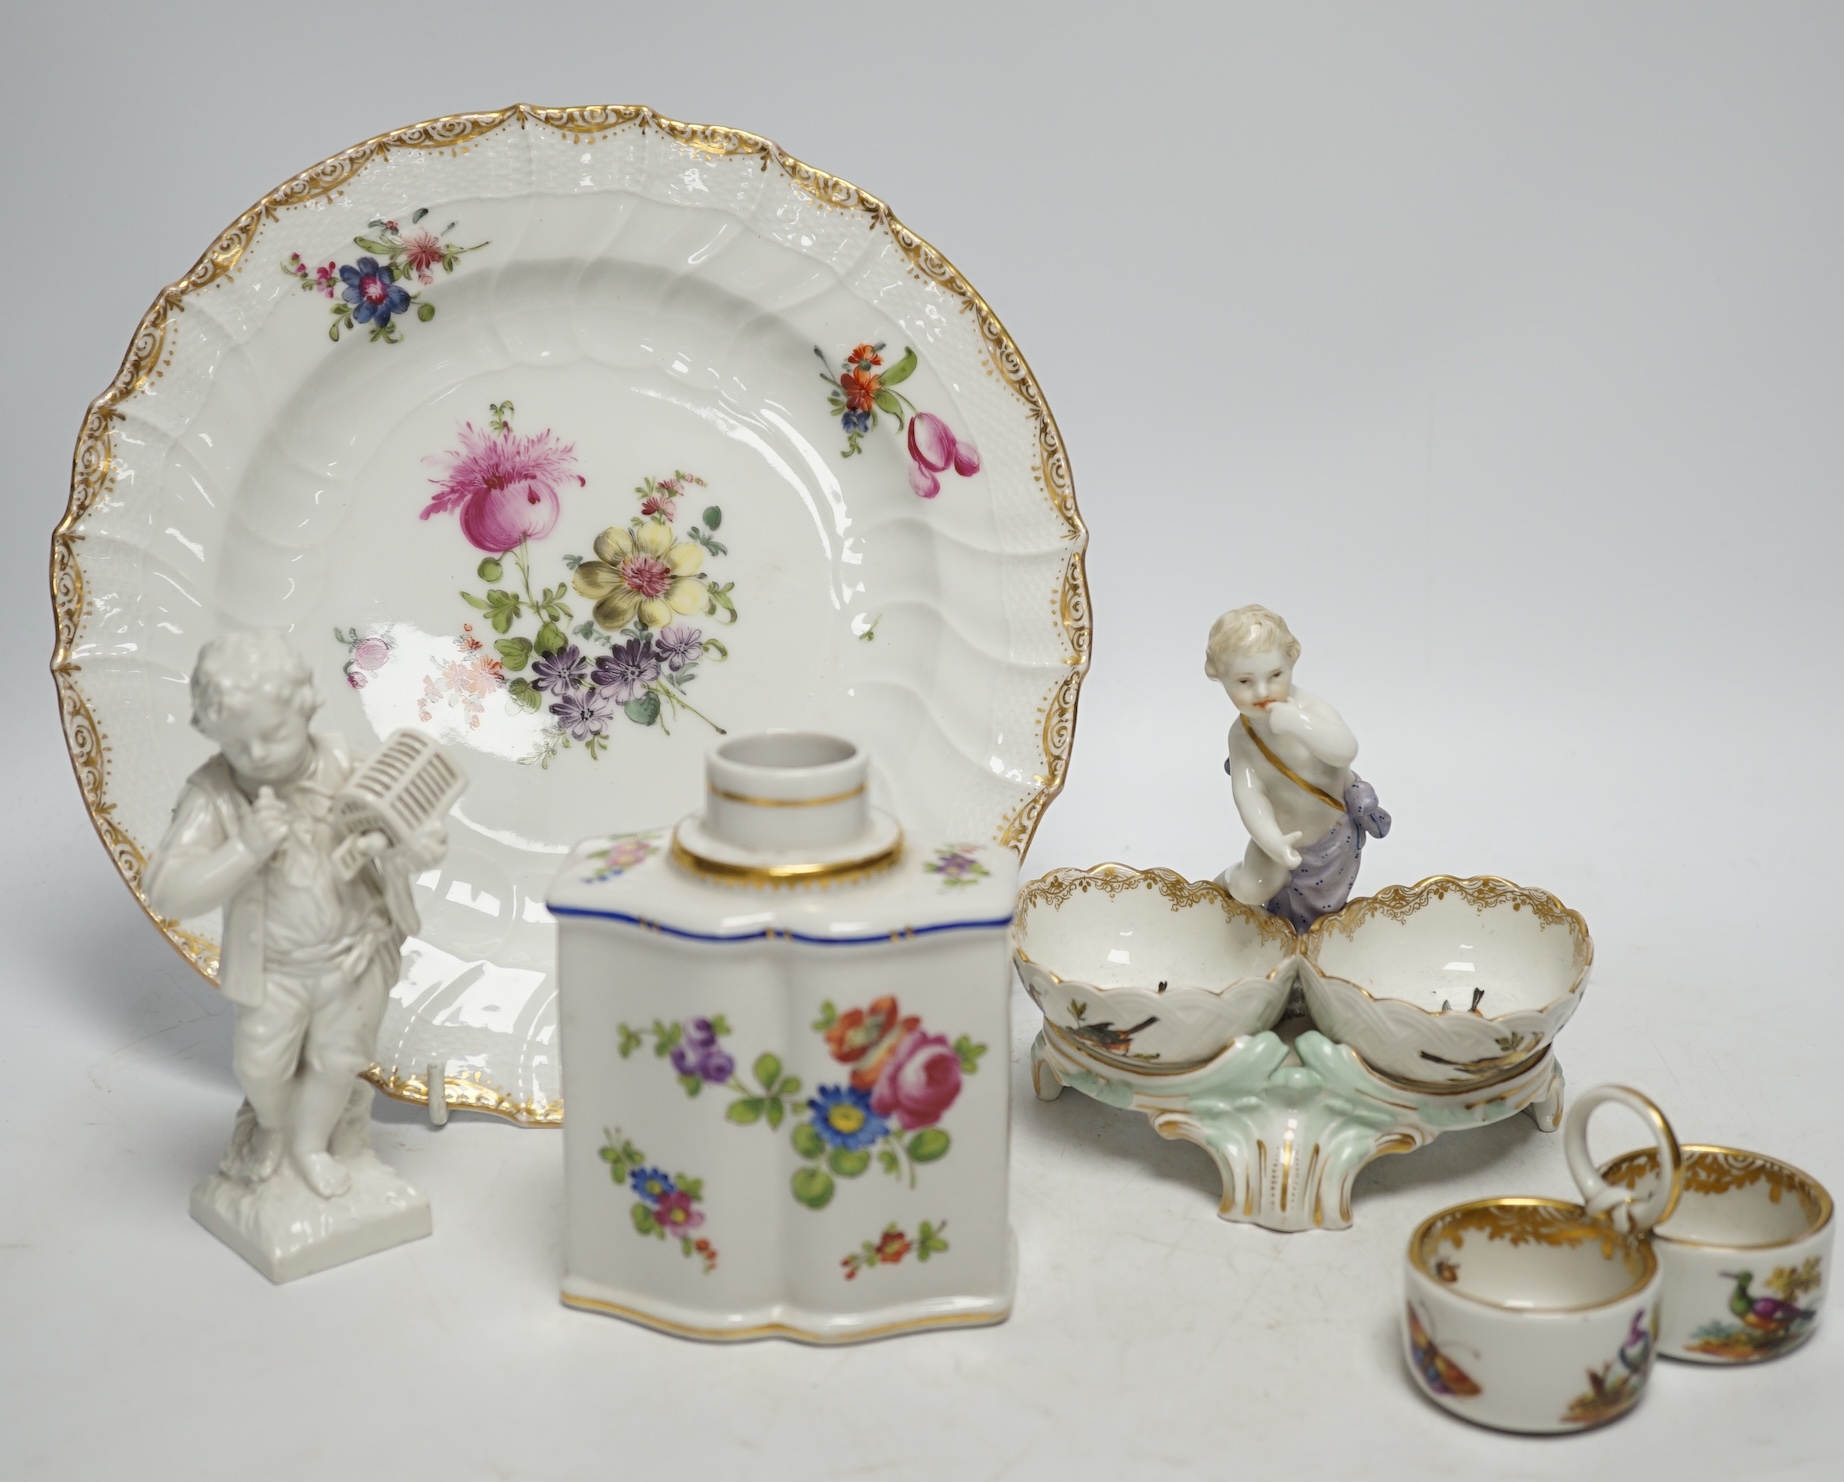 A group of Berlin and German porcelain: a plate, two salts, a figure and a tea canister, tallest figure 13.5cm high. Condition - fair to good.